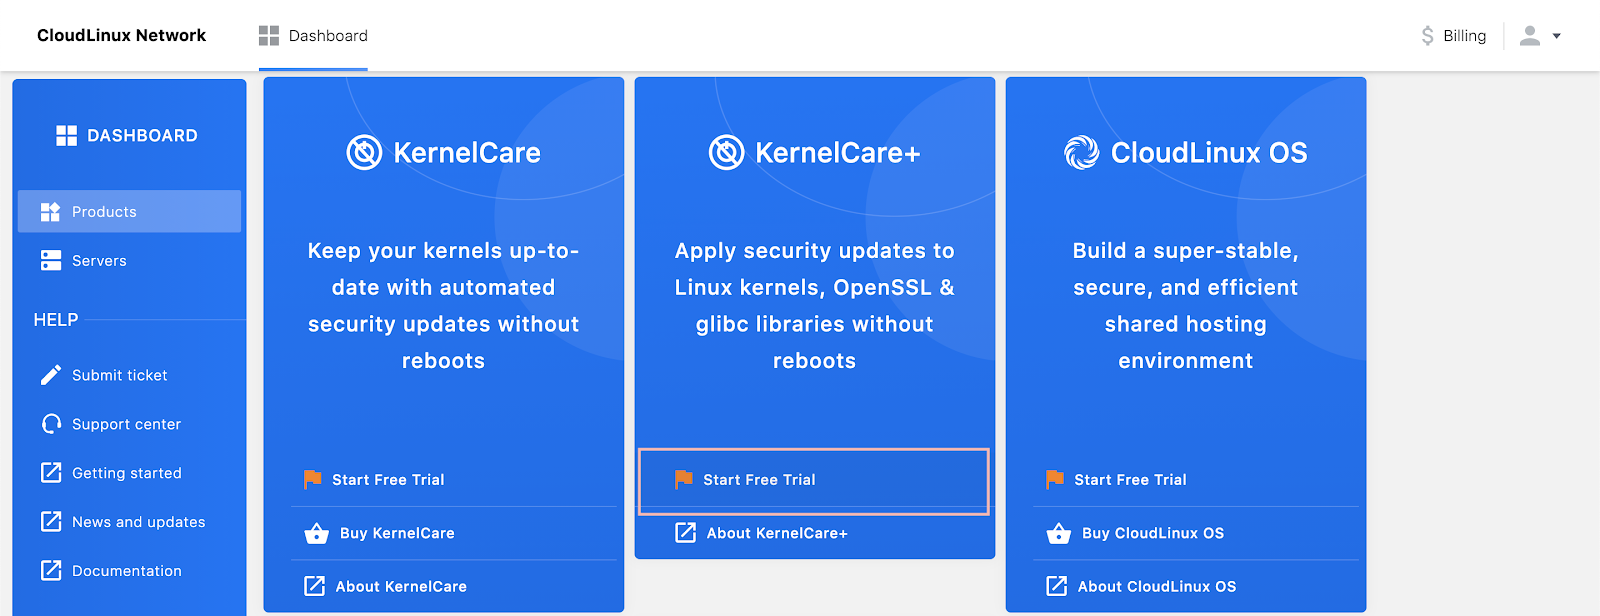 Start trial button on Cloud Linux Dashboard